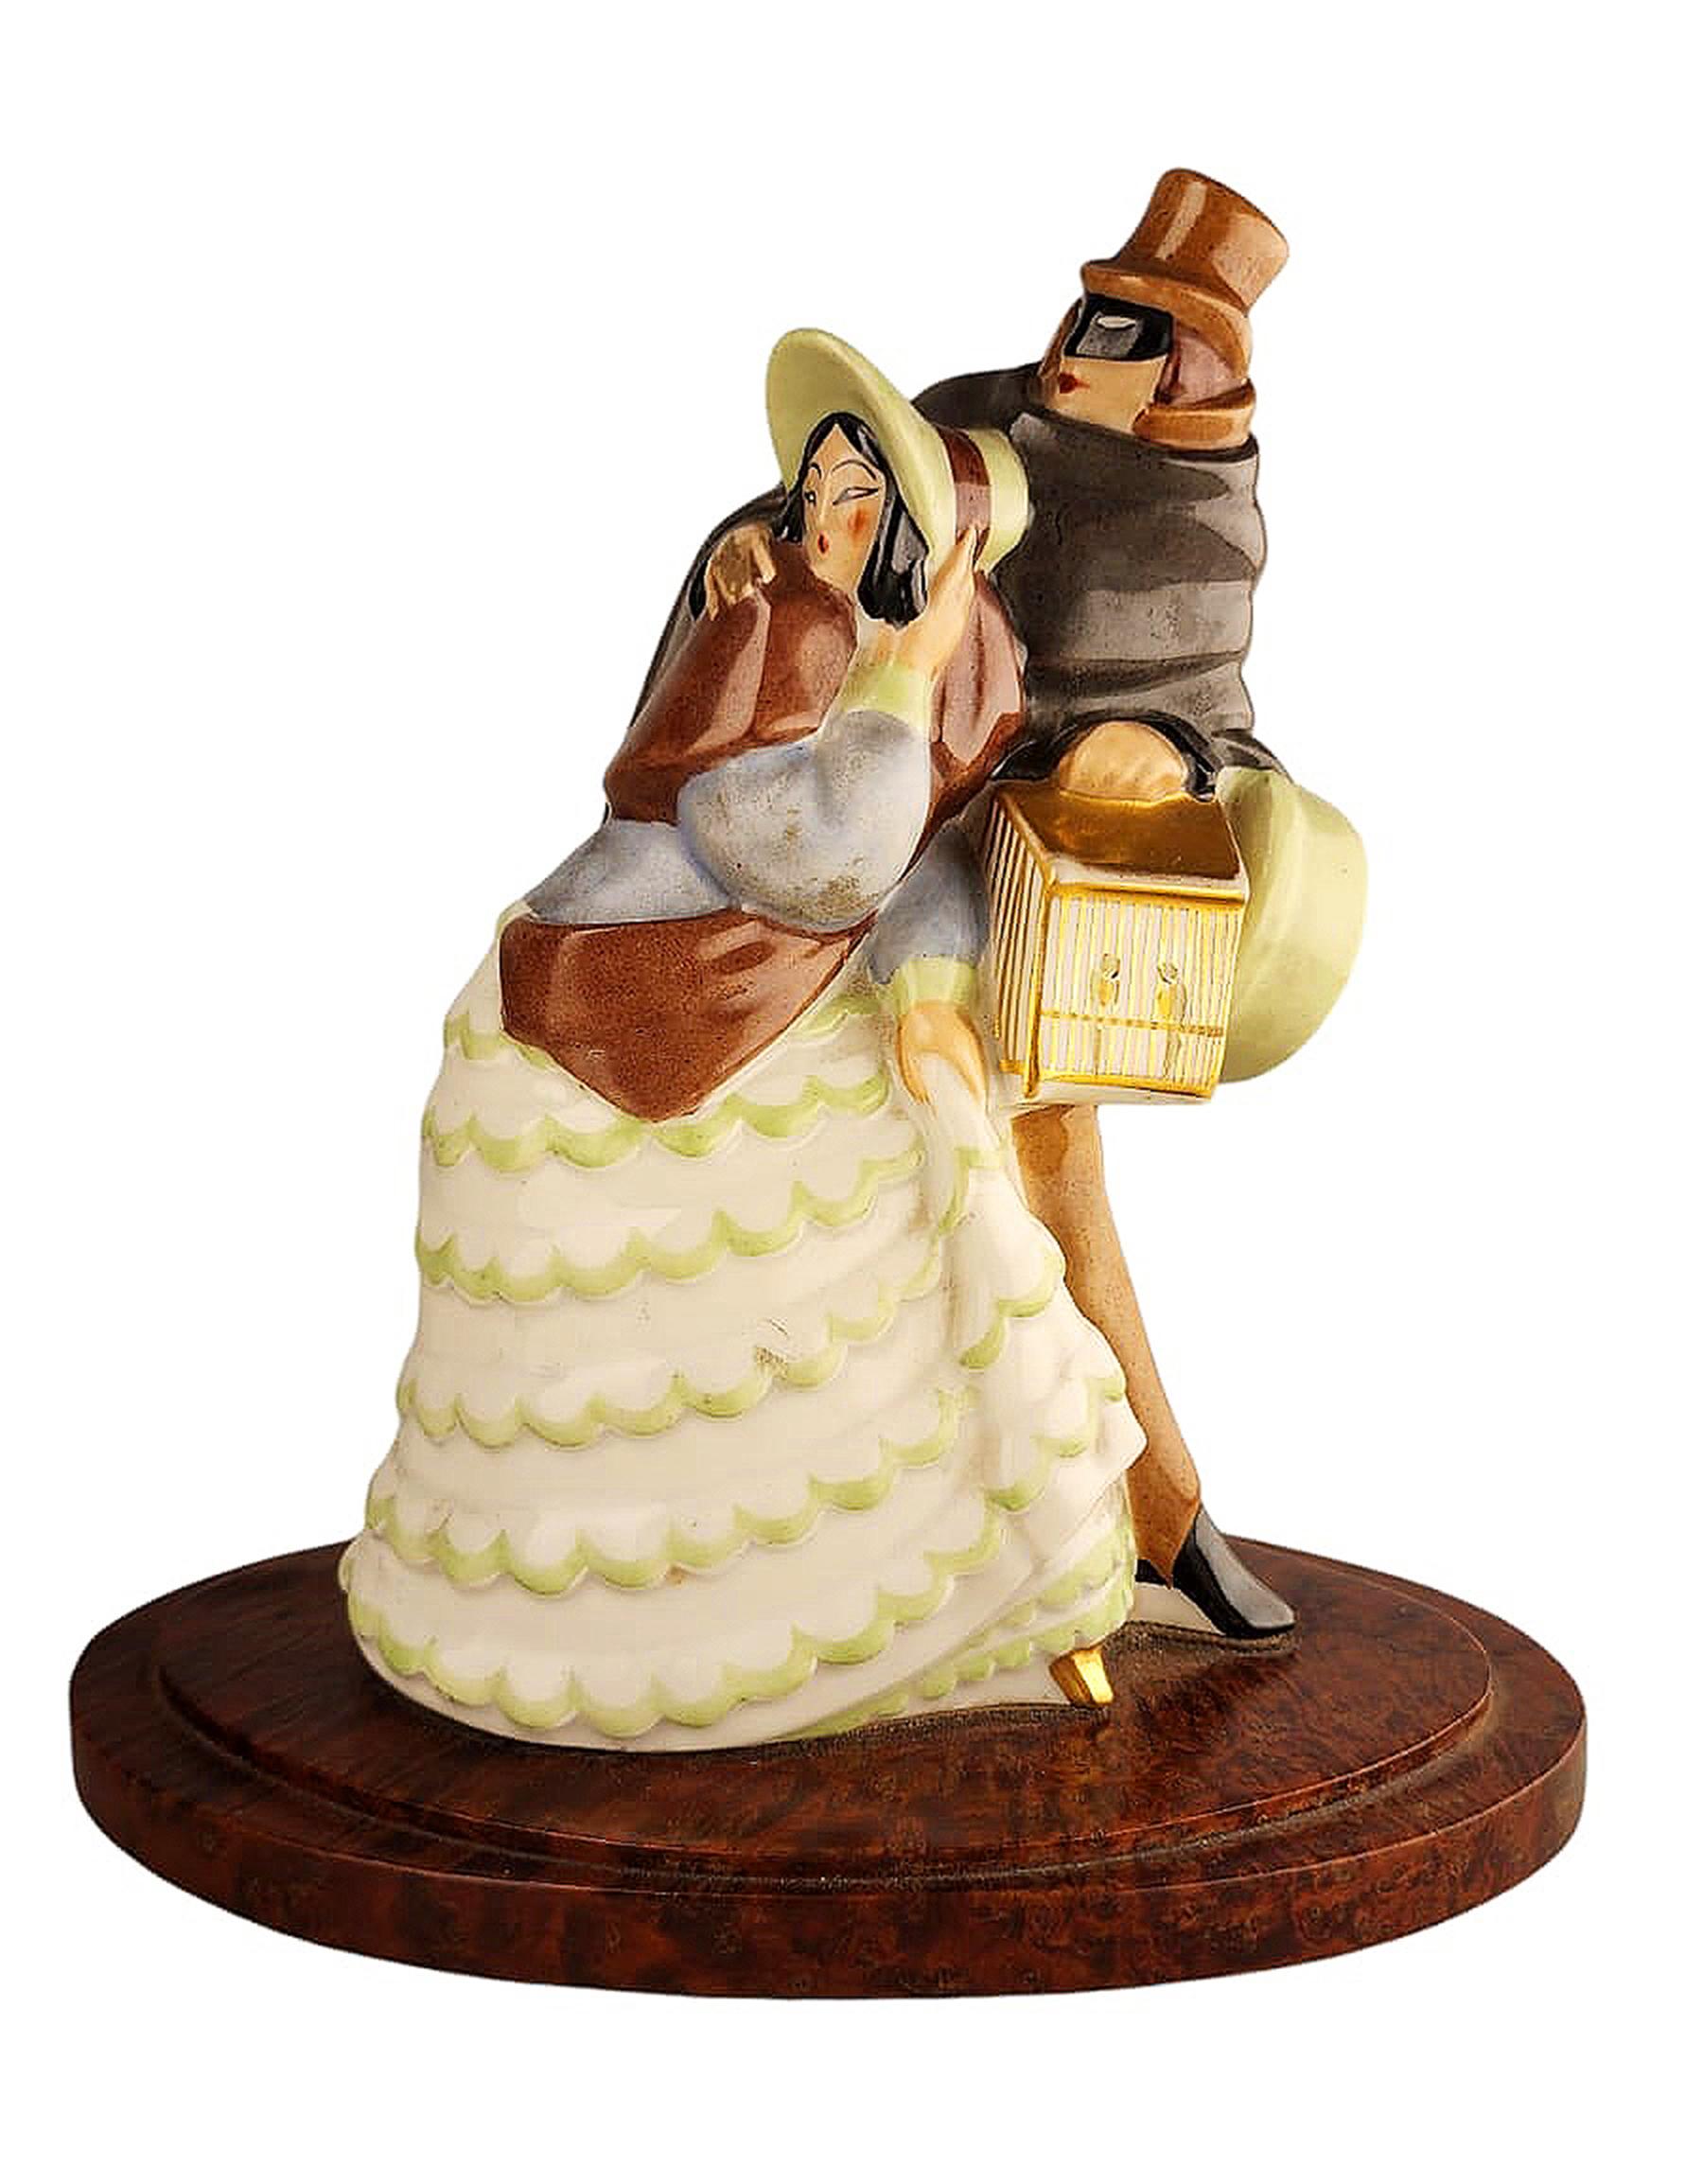 Early 20th century Art Déco perfume lamp of dressed up lady and masked man with cloak by Argilor from Paris, France

By: Argilor
Material: ceramic, paint, wood, enamel, cord
Technique: molded, pressed, carved, hand-carved, hand-crafted,